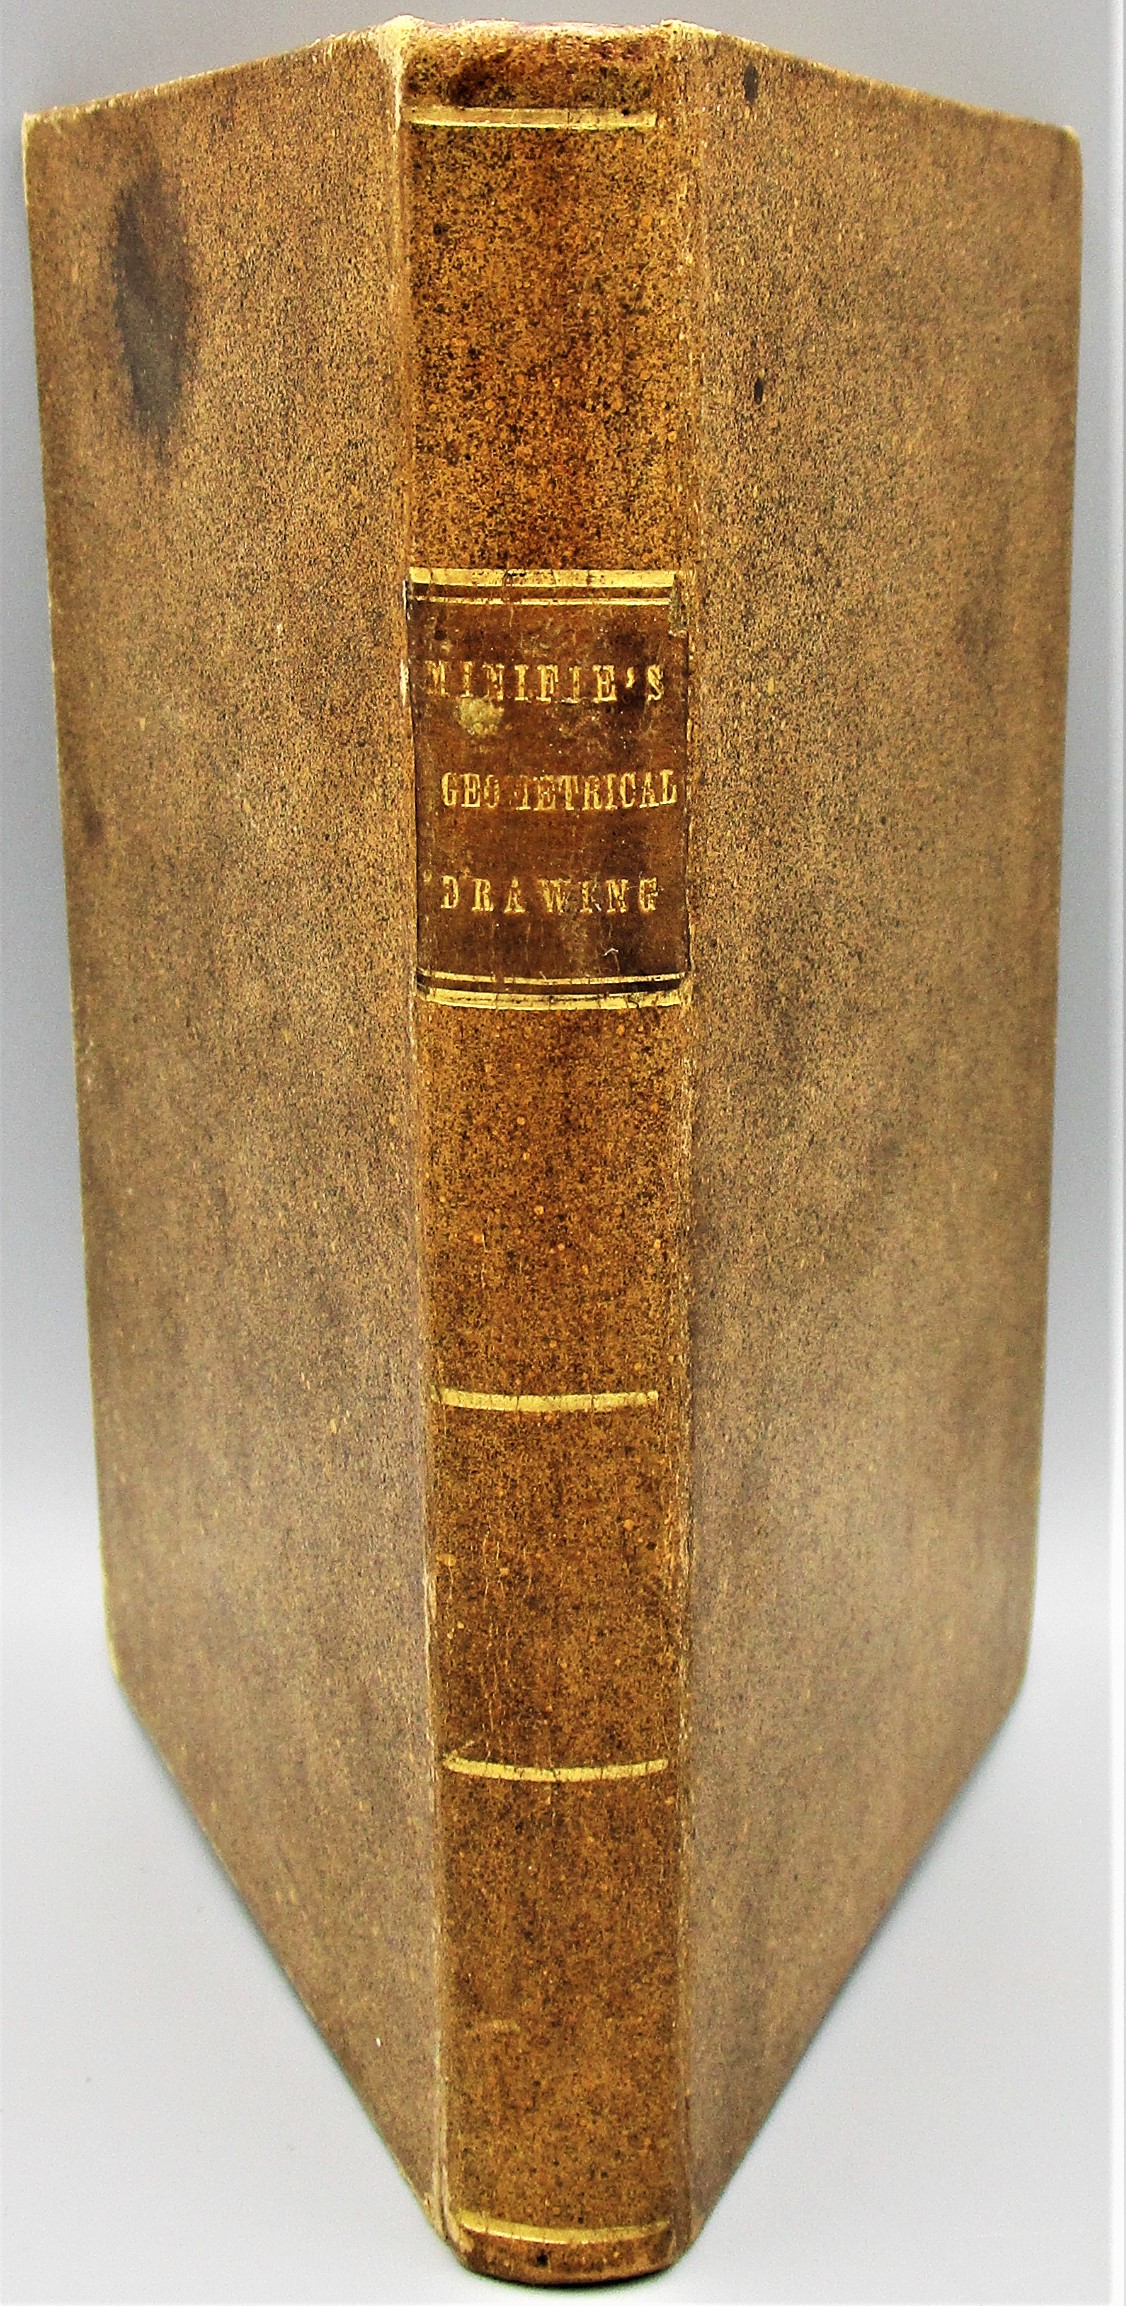 A TEXTBOOK OF GEOMETRICAL DRAWING, by William Minifie - 1849 [1st Ed]